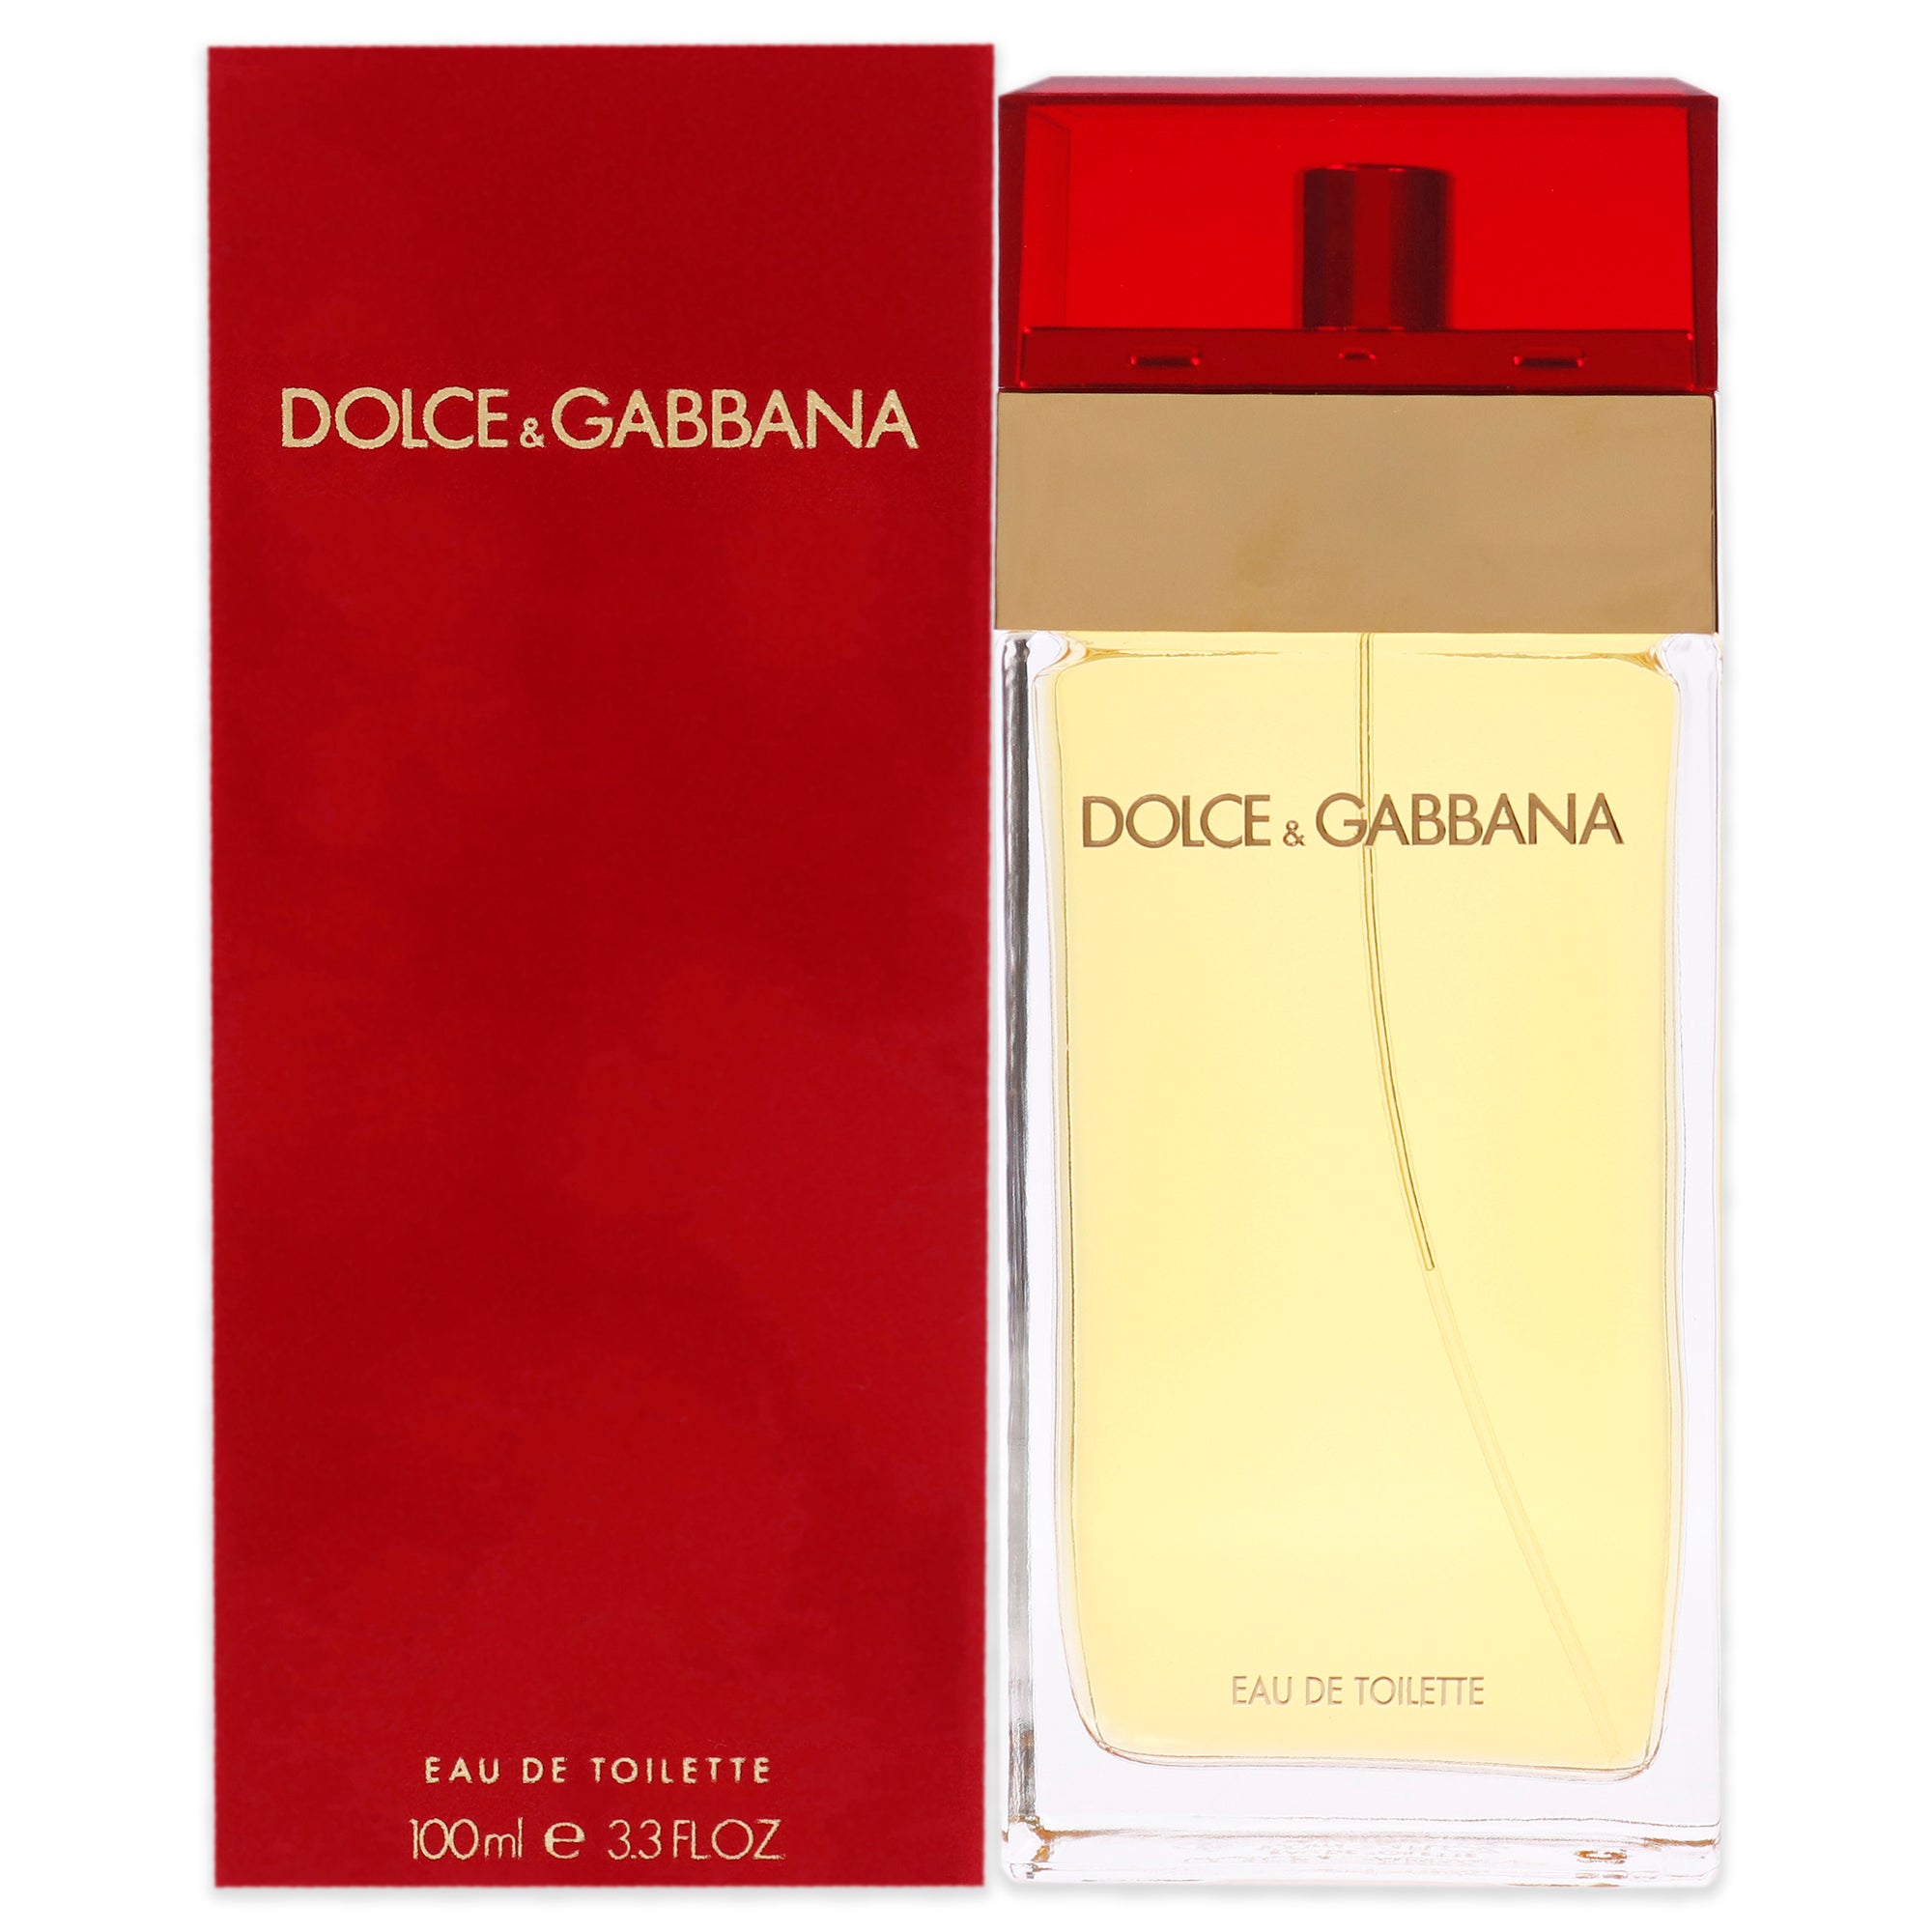 Dolce and Gabbana by Dolce and Gabbana for Women - 3.3 oz EDT Spray